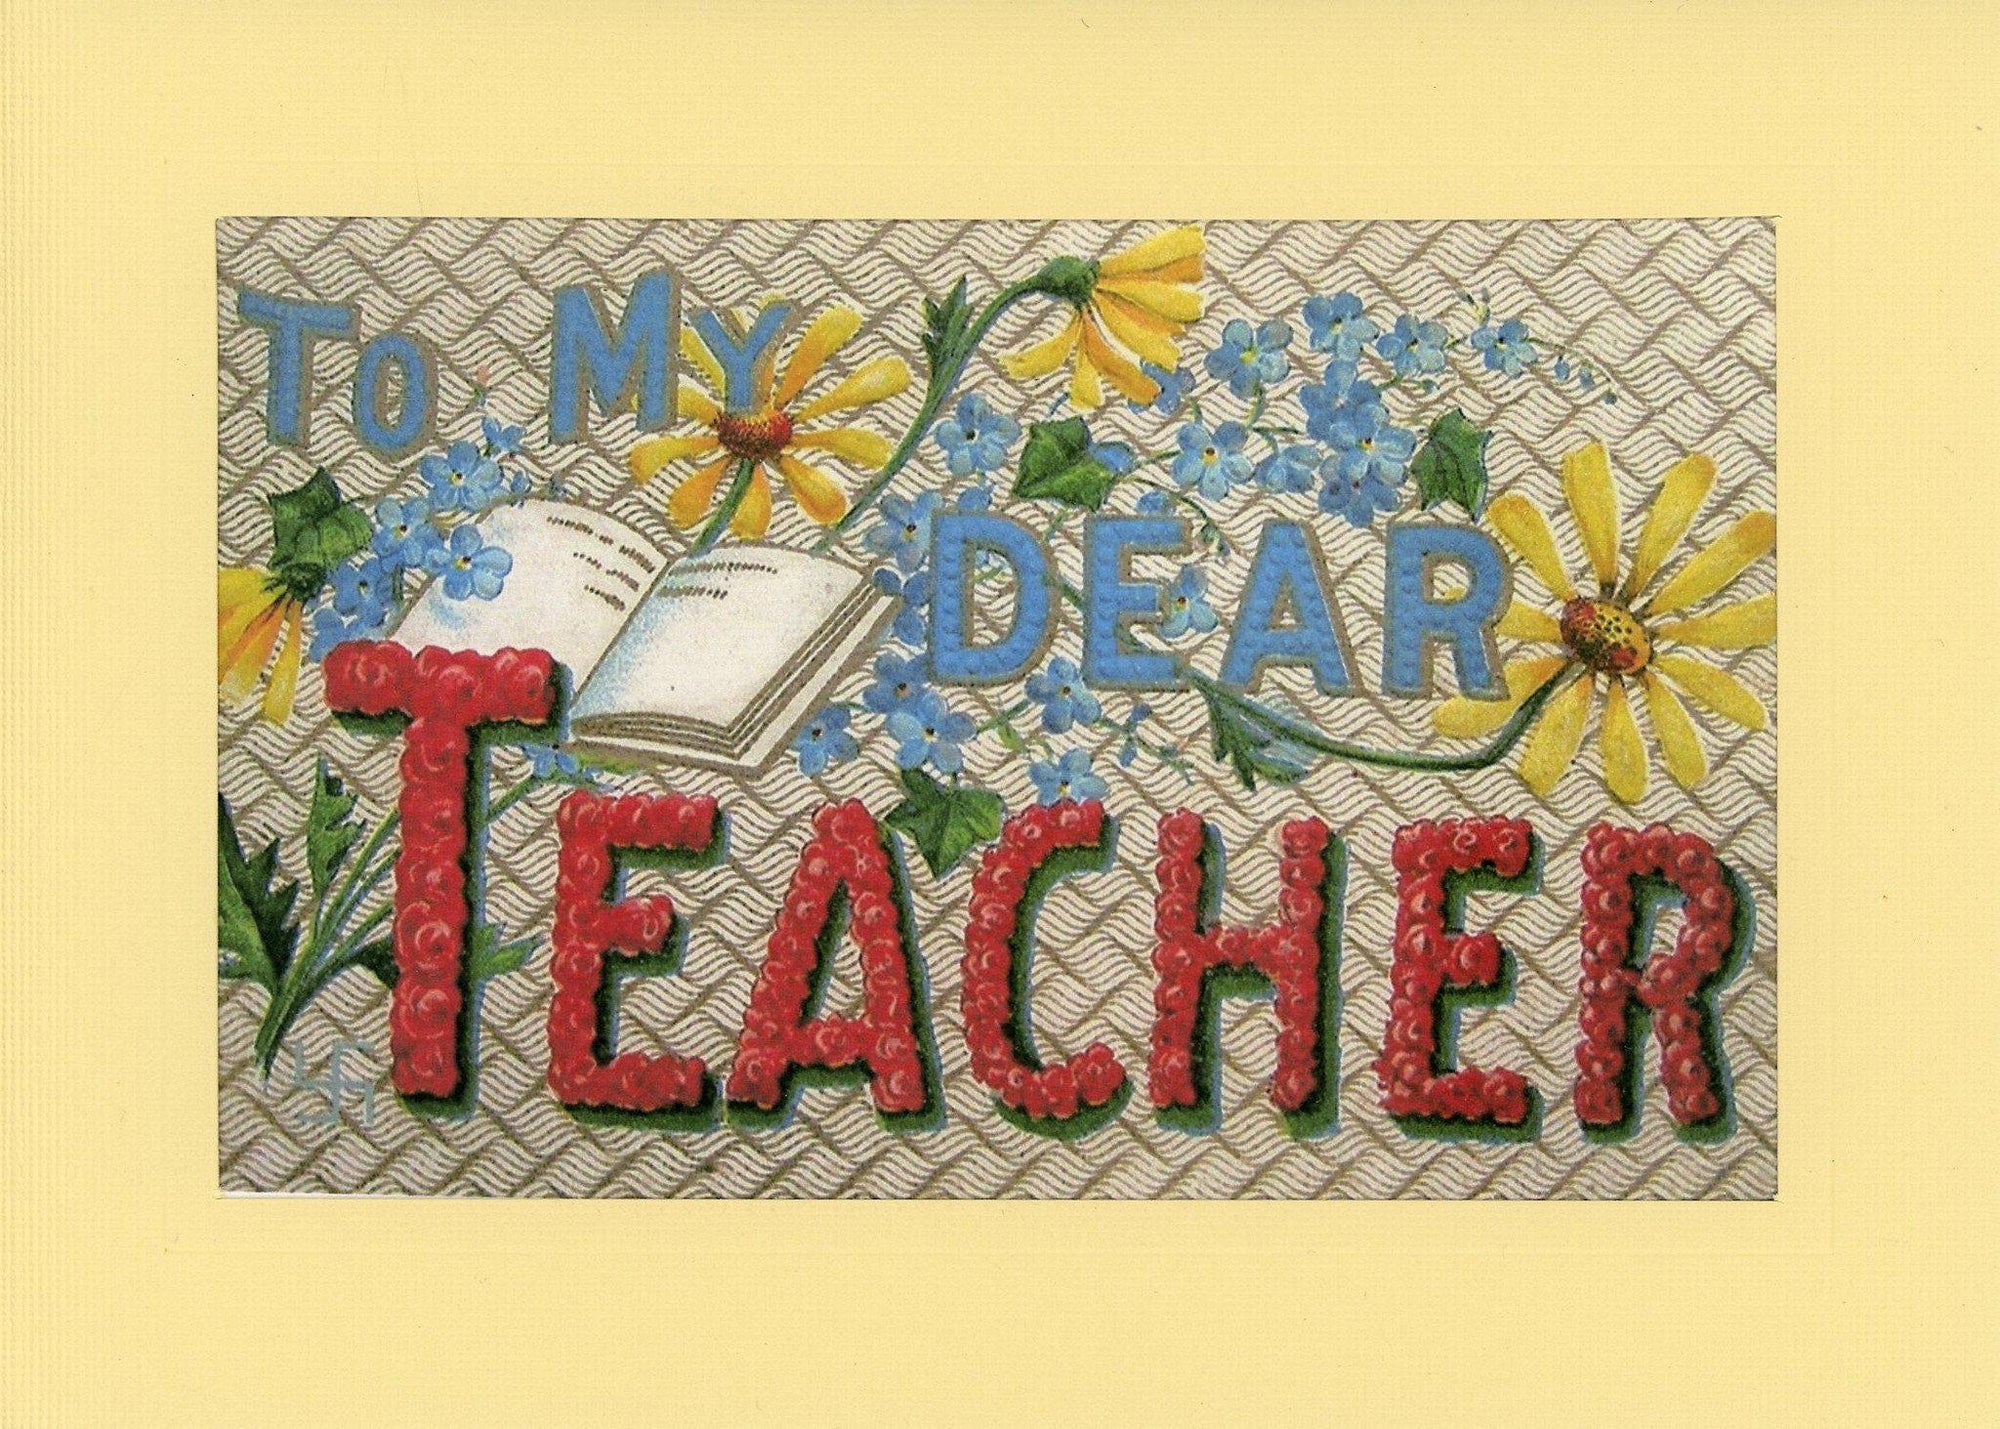 To My Dear Teacher-Greetings from the Past-Plymouth Cards